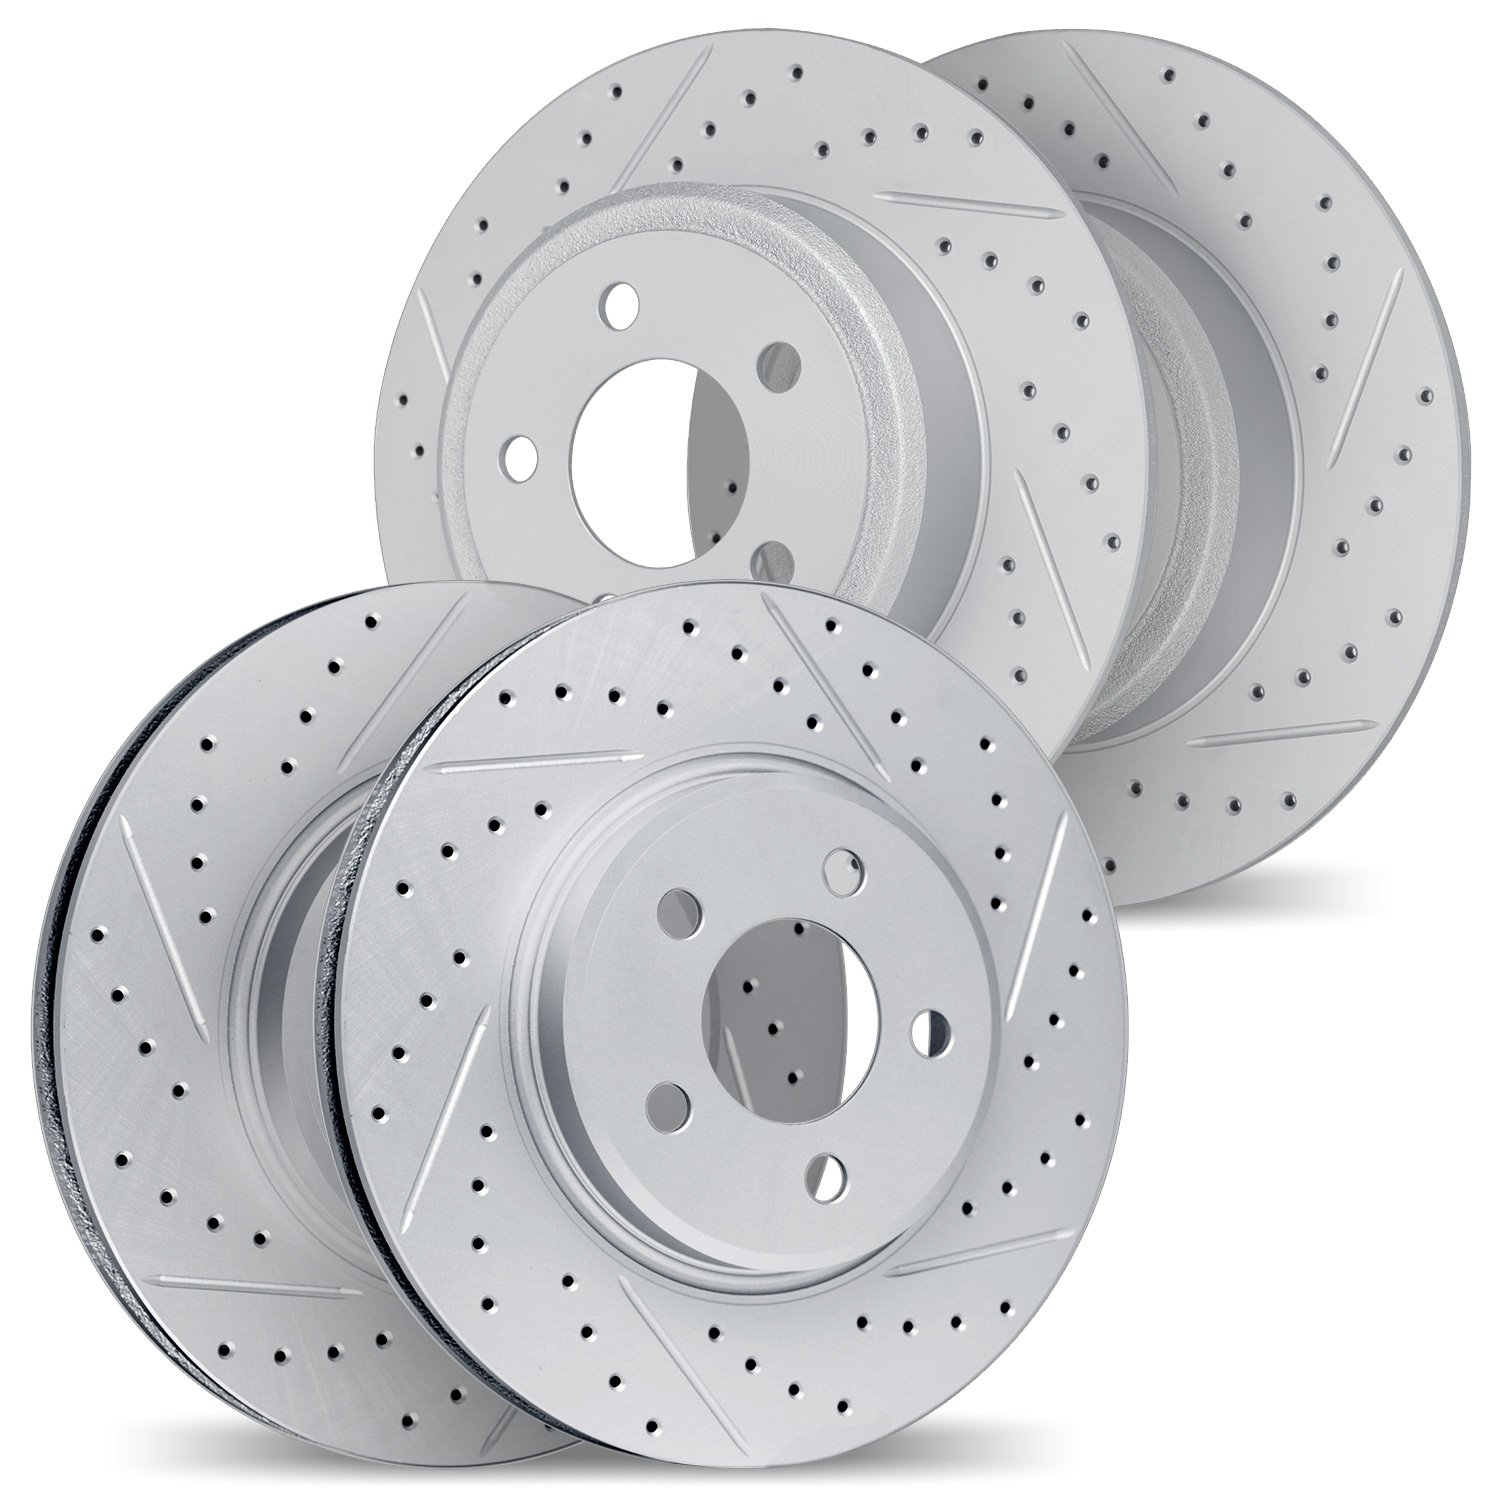 2004-76021 Geoperformance Drilled/Slotted Brake Rotors, 2009-2019 Multiple Makes/Models, Position: Front and Rear